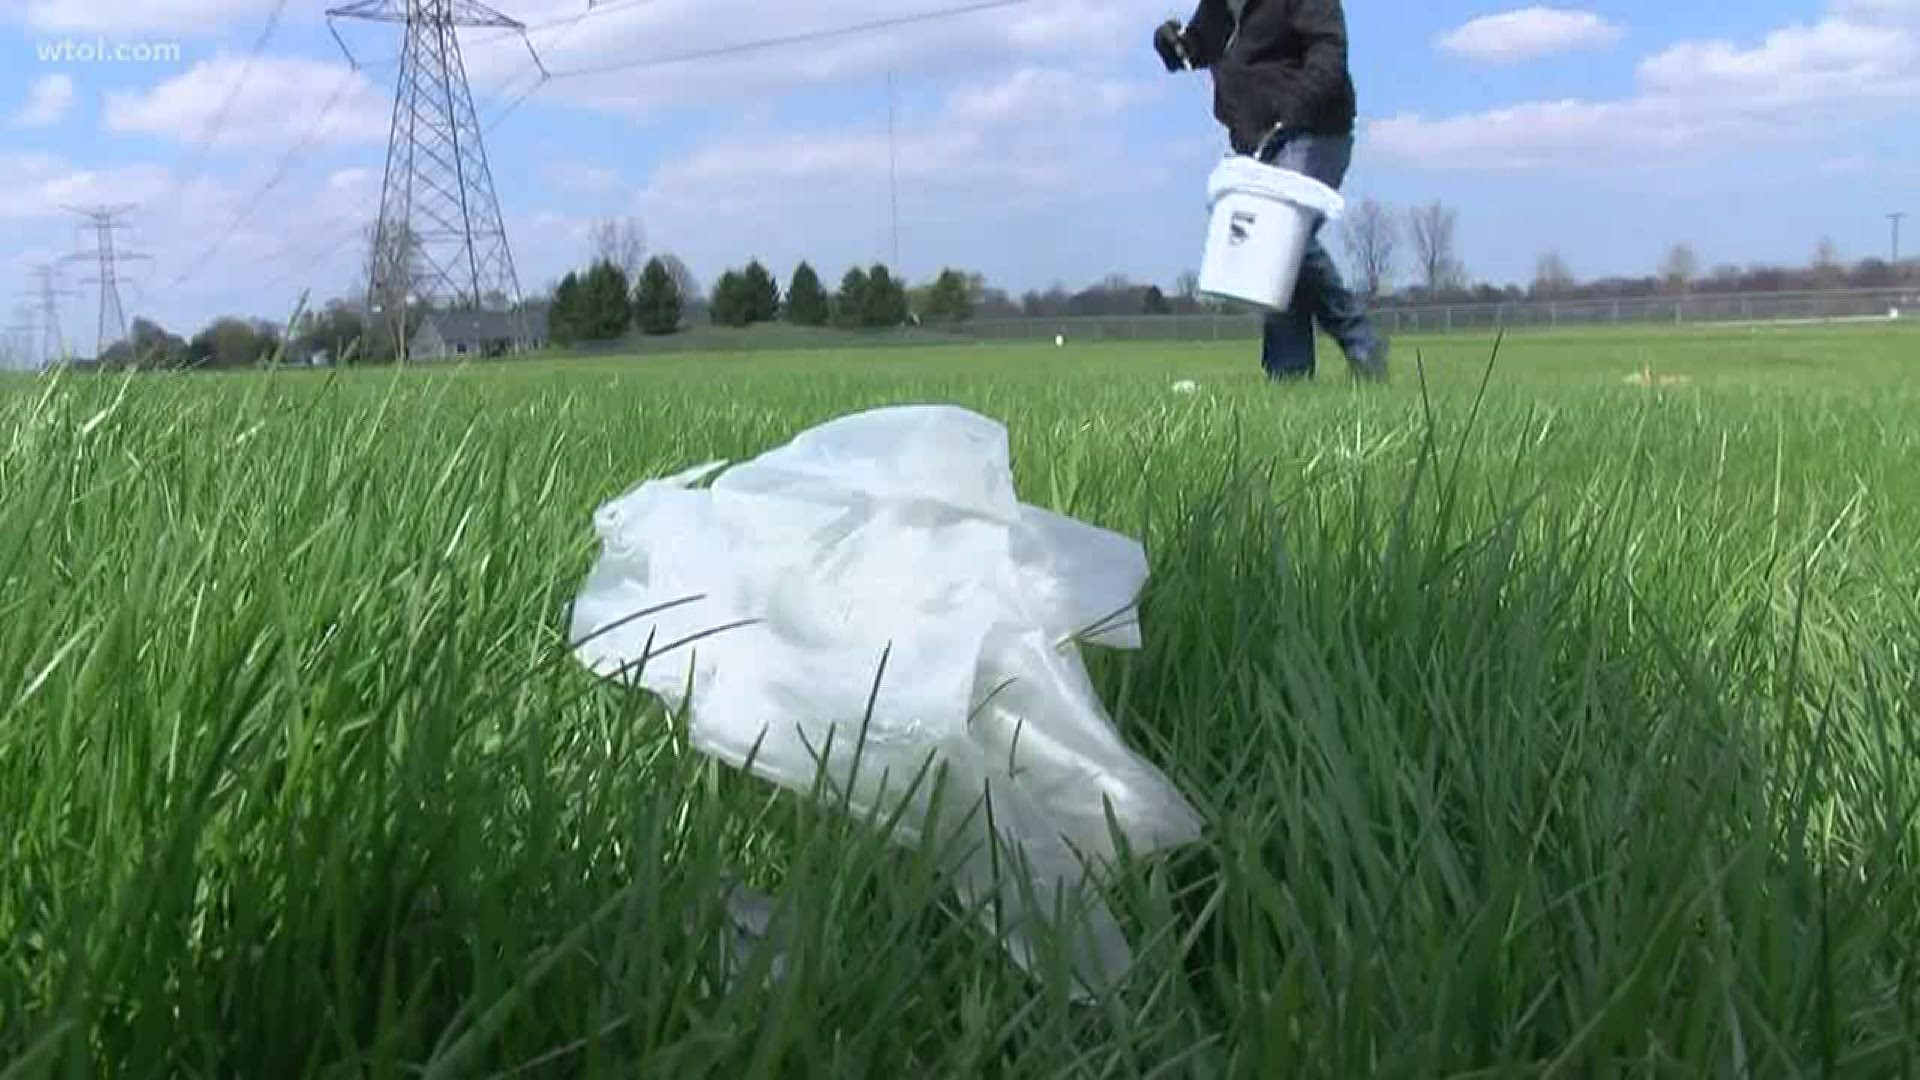 The Be The Solution Lucas County community group is trying to clean up increasing litter of masks, gloves and disinfecting wipes at businesses.